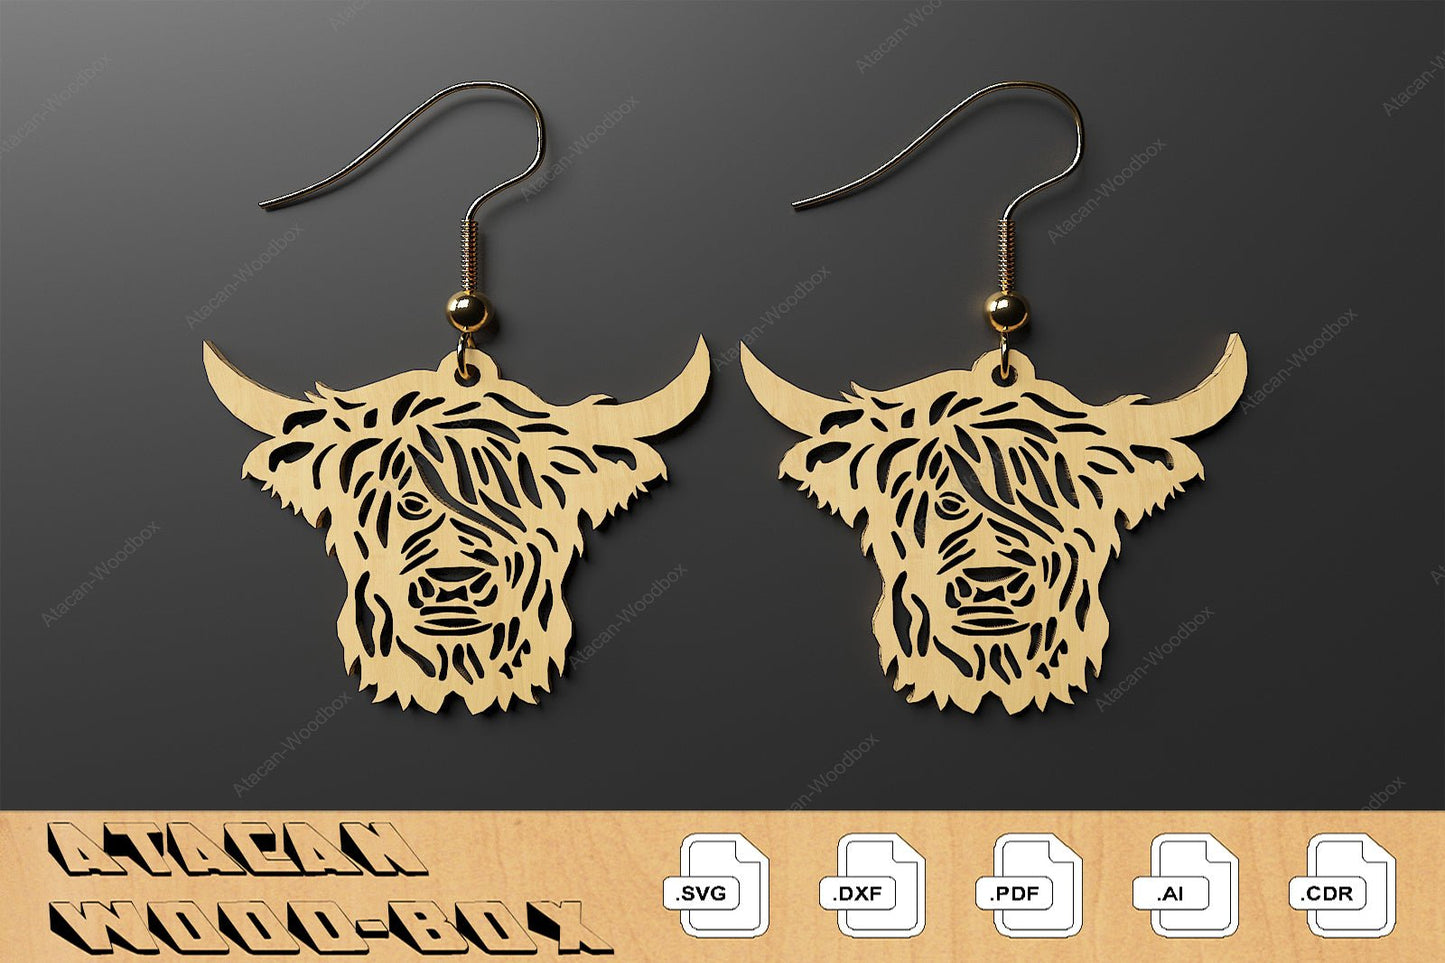 Highland Cows Earring Set / High Land Cow Cutting Files / Jewelry Design SVG DXF Ai CDR 336